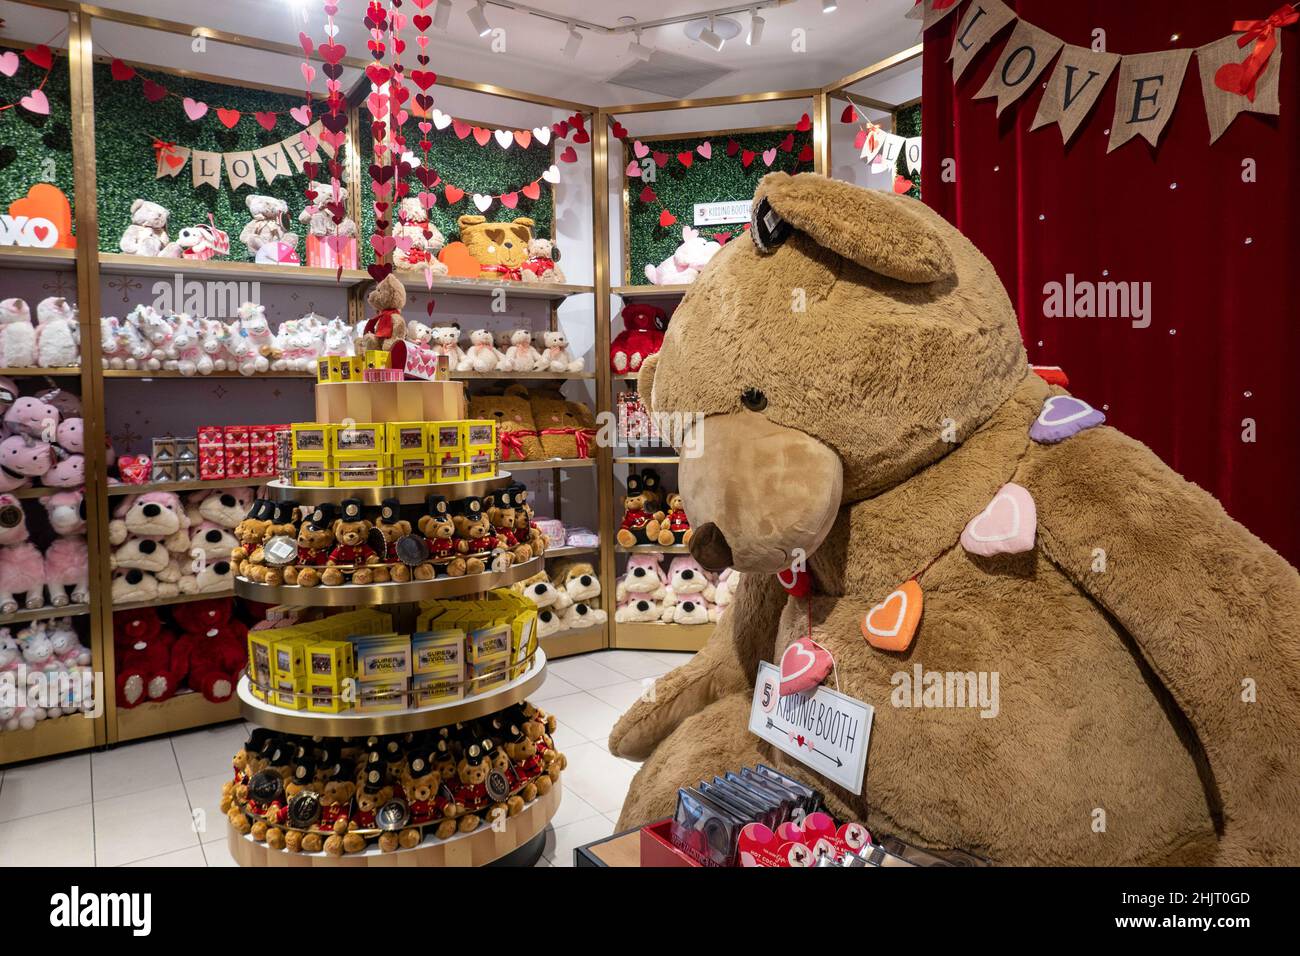 FAO Schwarz marks 160 years with party at Rockefeller CenterToy